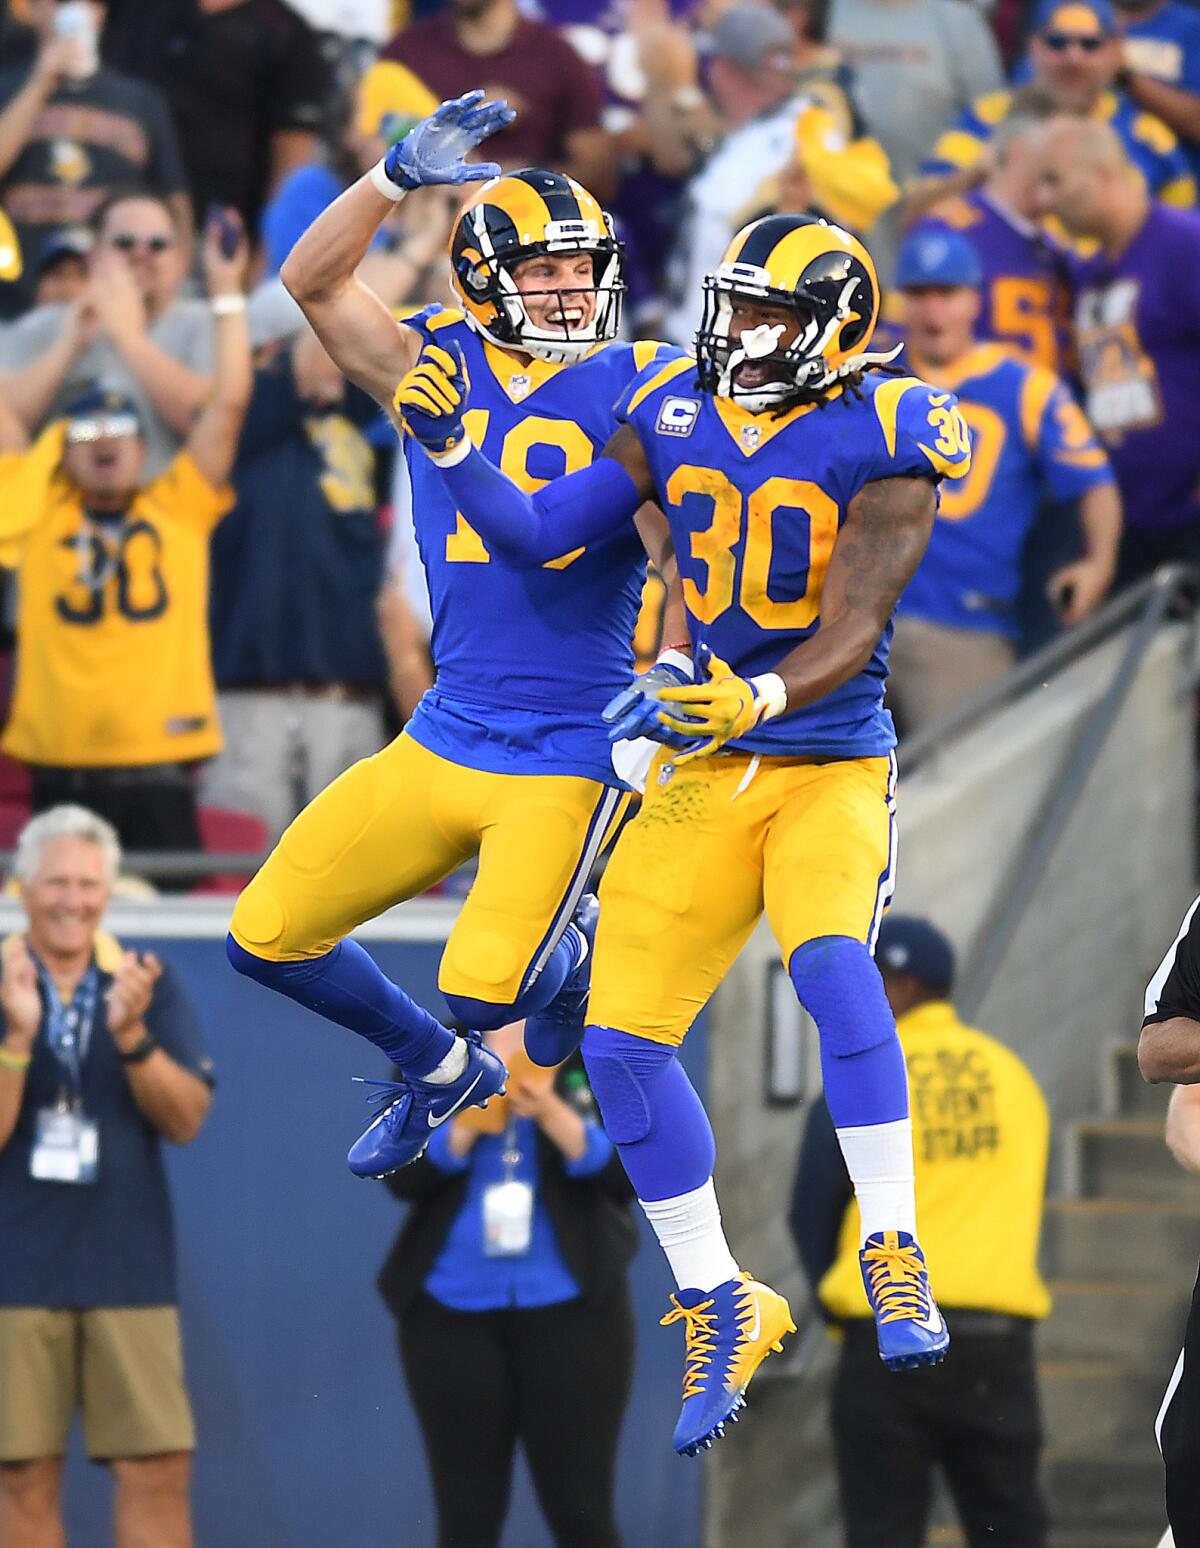 Rams receiver Cooper Kupp, left, celebrates his long touchdown catch with running back Todd Gurley II against the Vikings in the second quarter on Sept. 27.